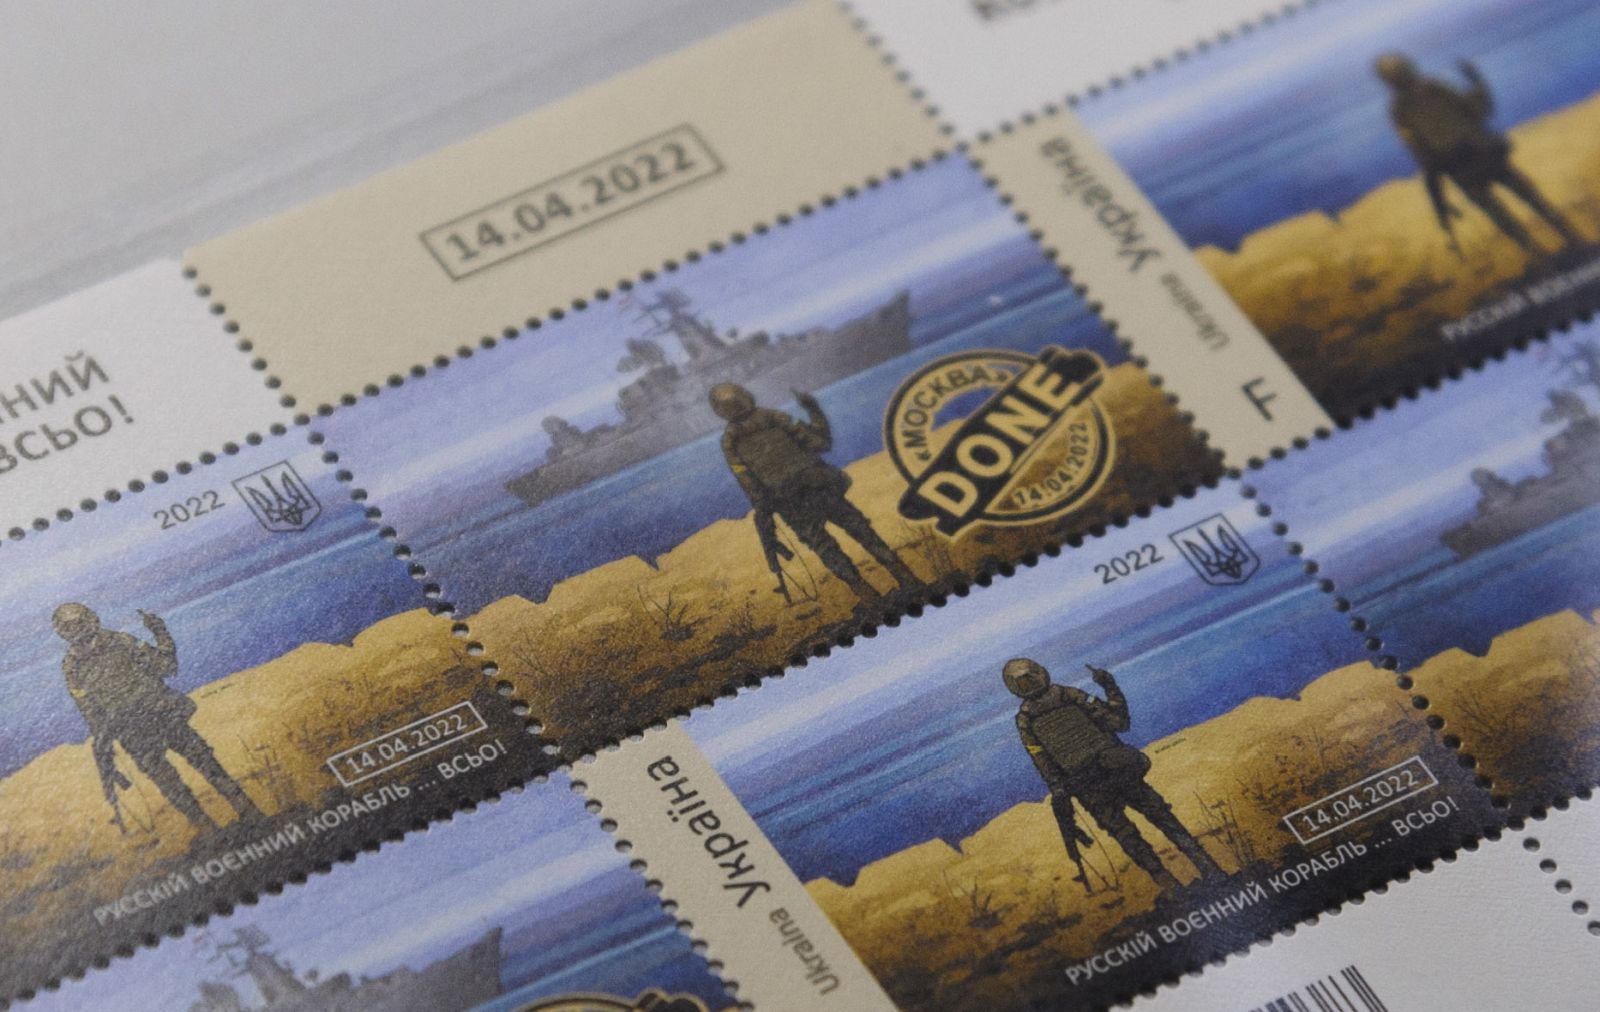 epa09969062 A view of postage stamps at a Post Office in the western Ukrainian city of Lviv, Ukraine, 23 May 2022, on the occasion of the official release of the second of a series of Ukrainian postage stamps titled 'Russian warship - Done!'. The first series of the postage stamps, depicting a Ukrainian soldier making a hand gesture at a Russian warship, were issued in April 2022 in honor of the heroism of Ukrainian border guards from Zmiinyi (Snake) Island. Russian troops entered Ukraine on 24 February resulting in fighting and destruction in the country and triggering a series of severe economic sanctions on Russia by Western countries.  EPA/MYKOLA TYS